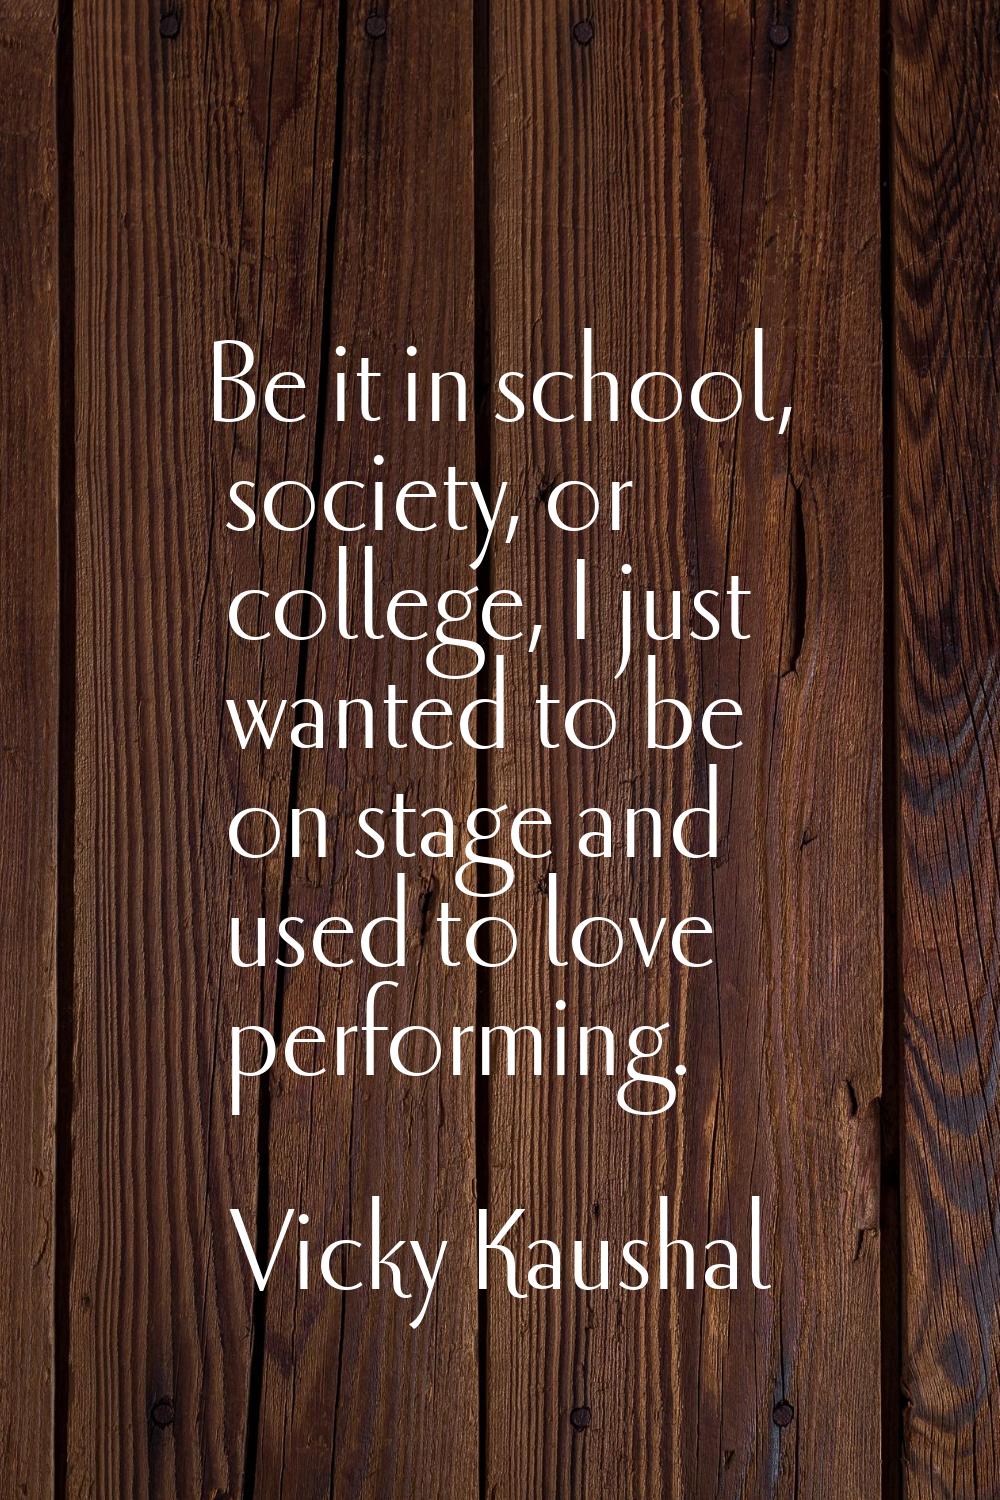 Be it in school, society, or college, I just wanted to be on stage and used to love performing.